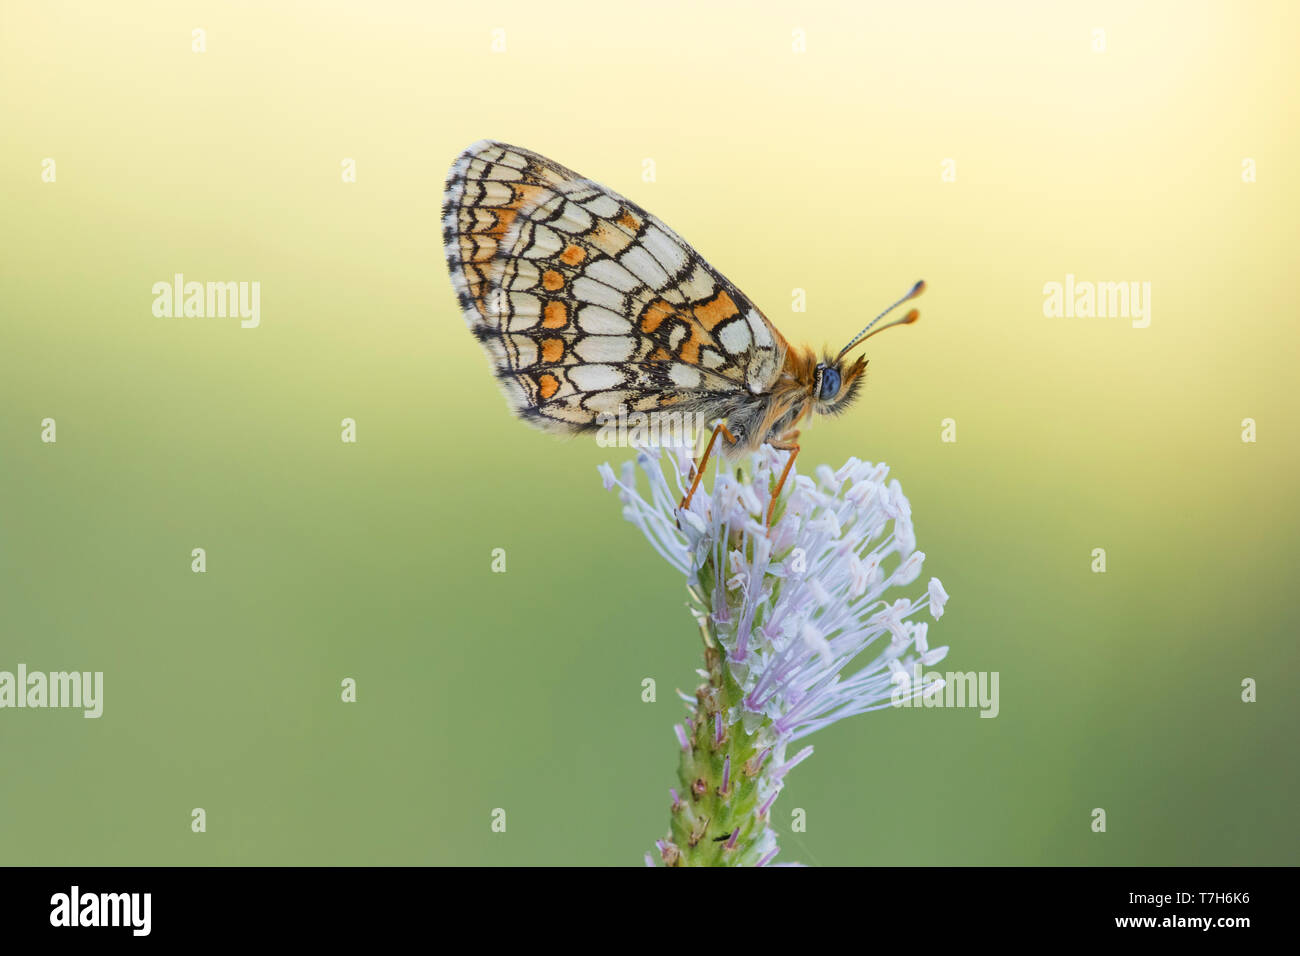 Heath Fritillary (Melitaea athalia) resting on top of small flower in Mercantour in France, against a natural green colored background. Stock Photo